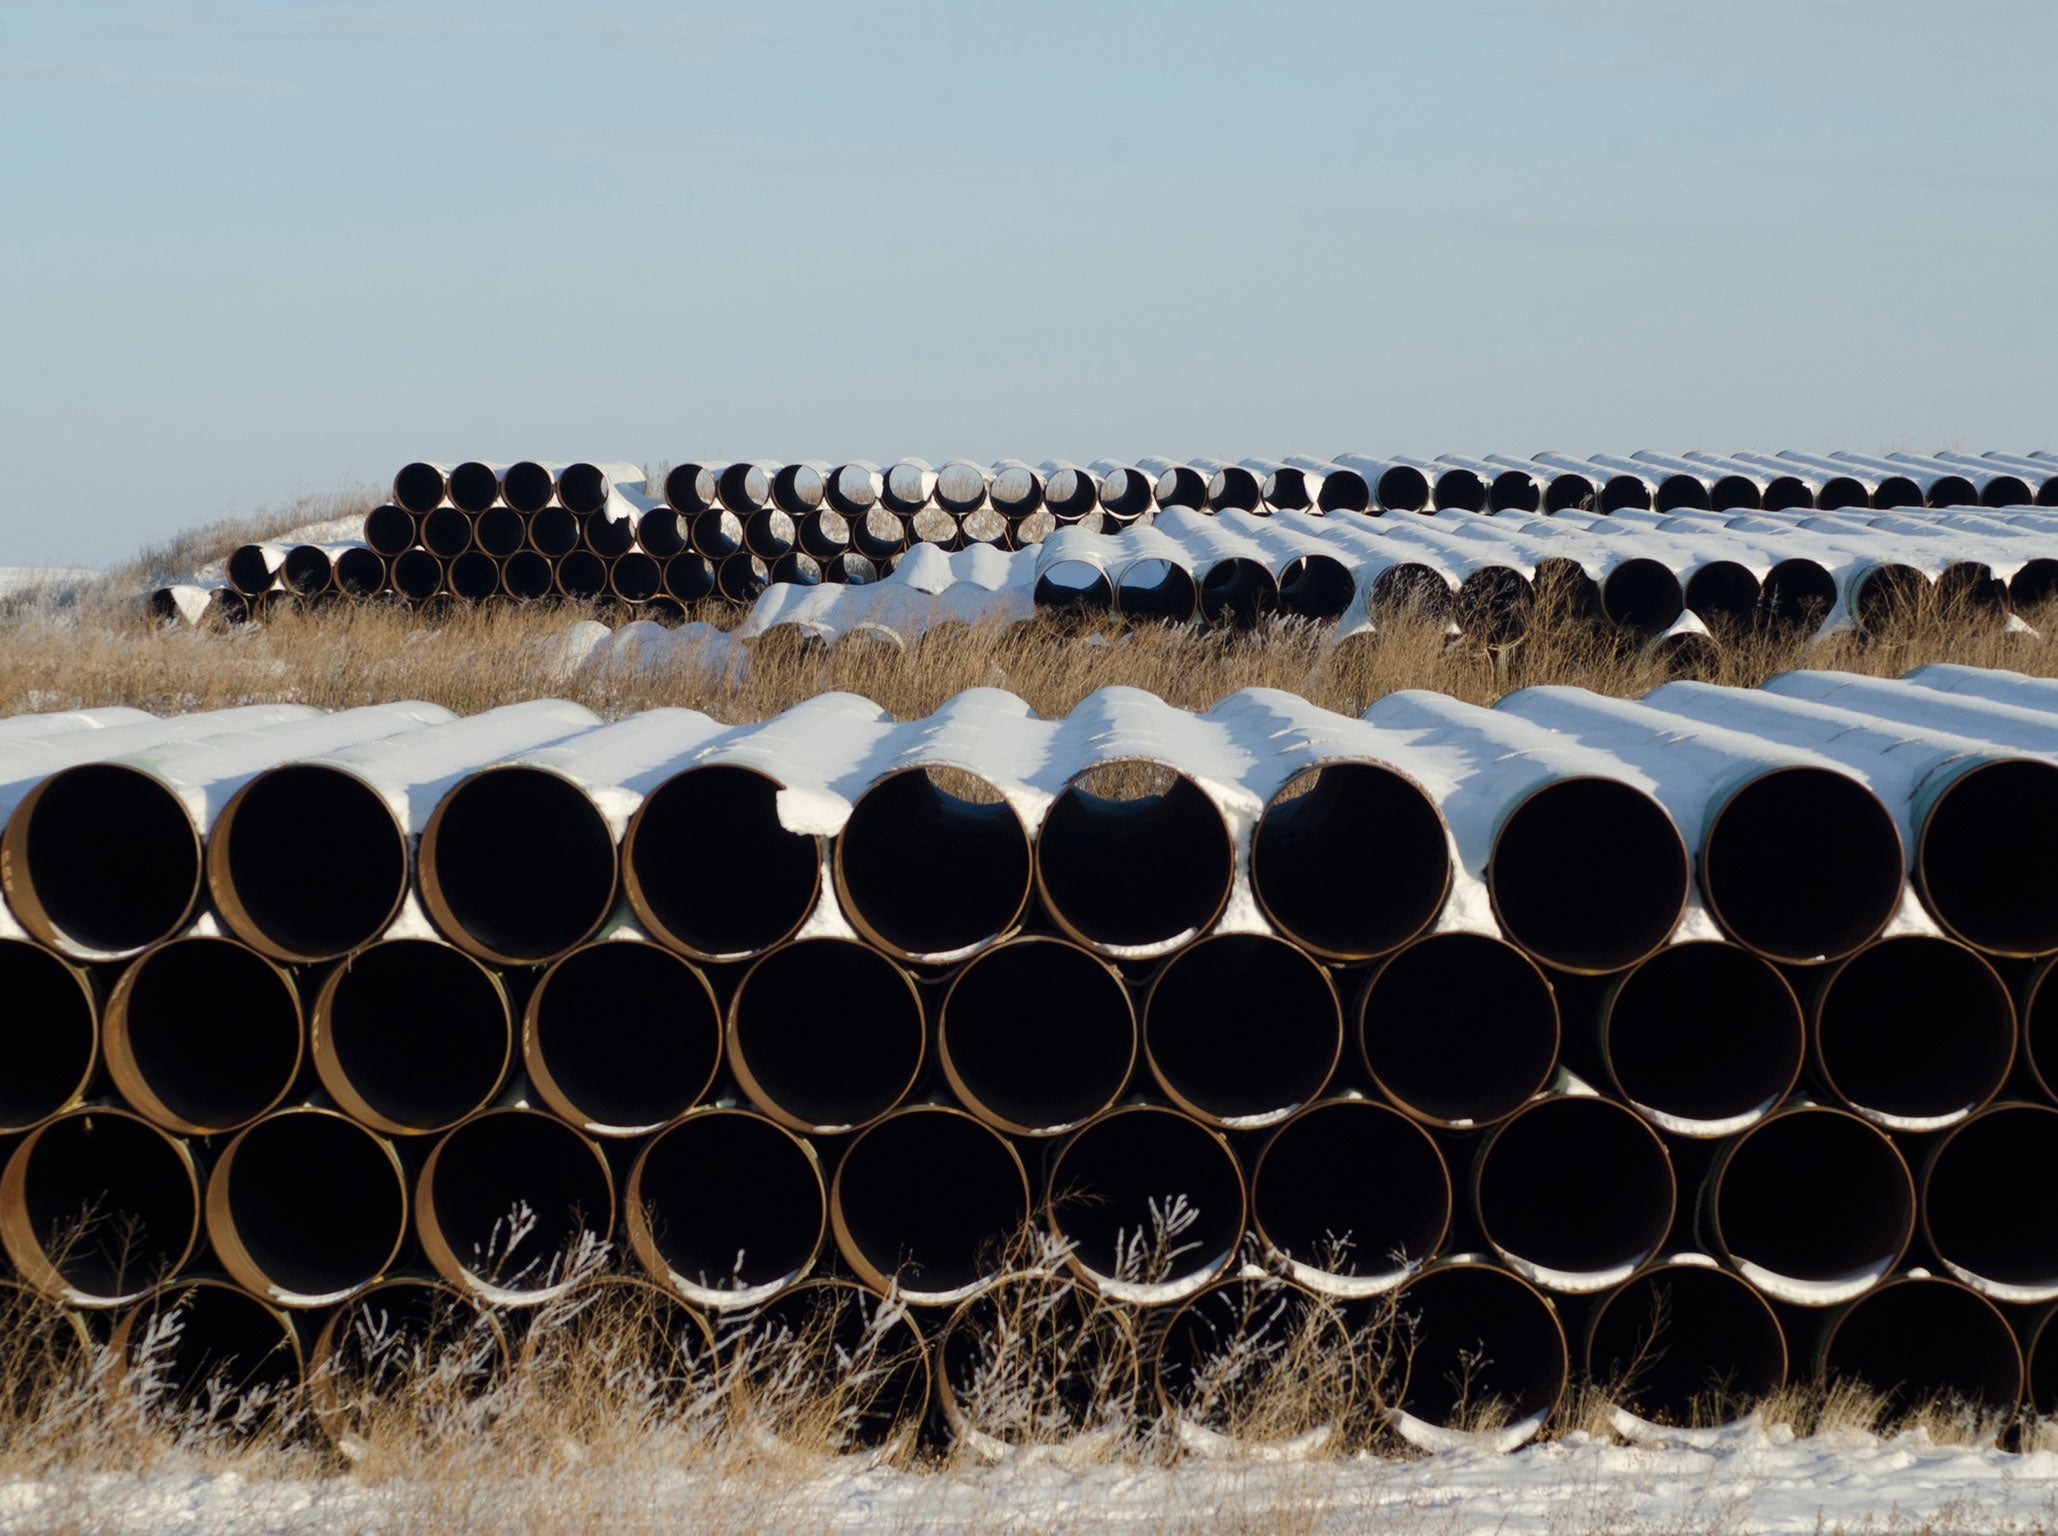 A depot used to store pipes for Transcanada planned Keystone XL oil pipeline is seen in Gascoyne, North Dakota November 14, 2014